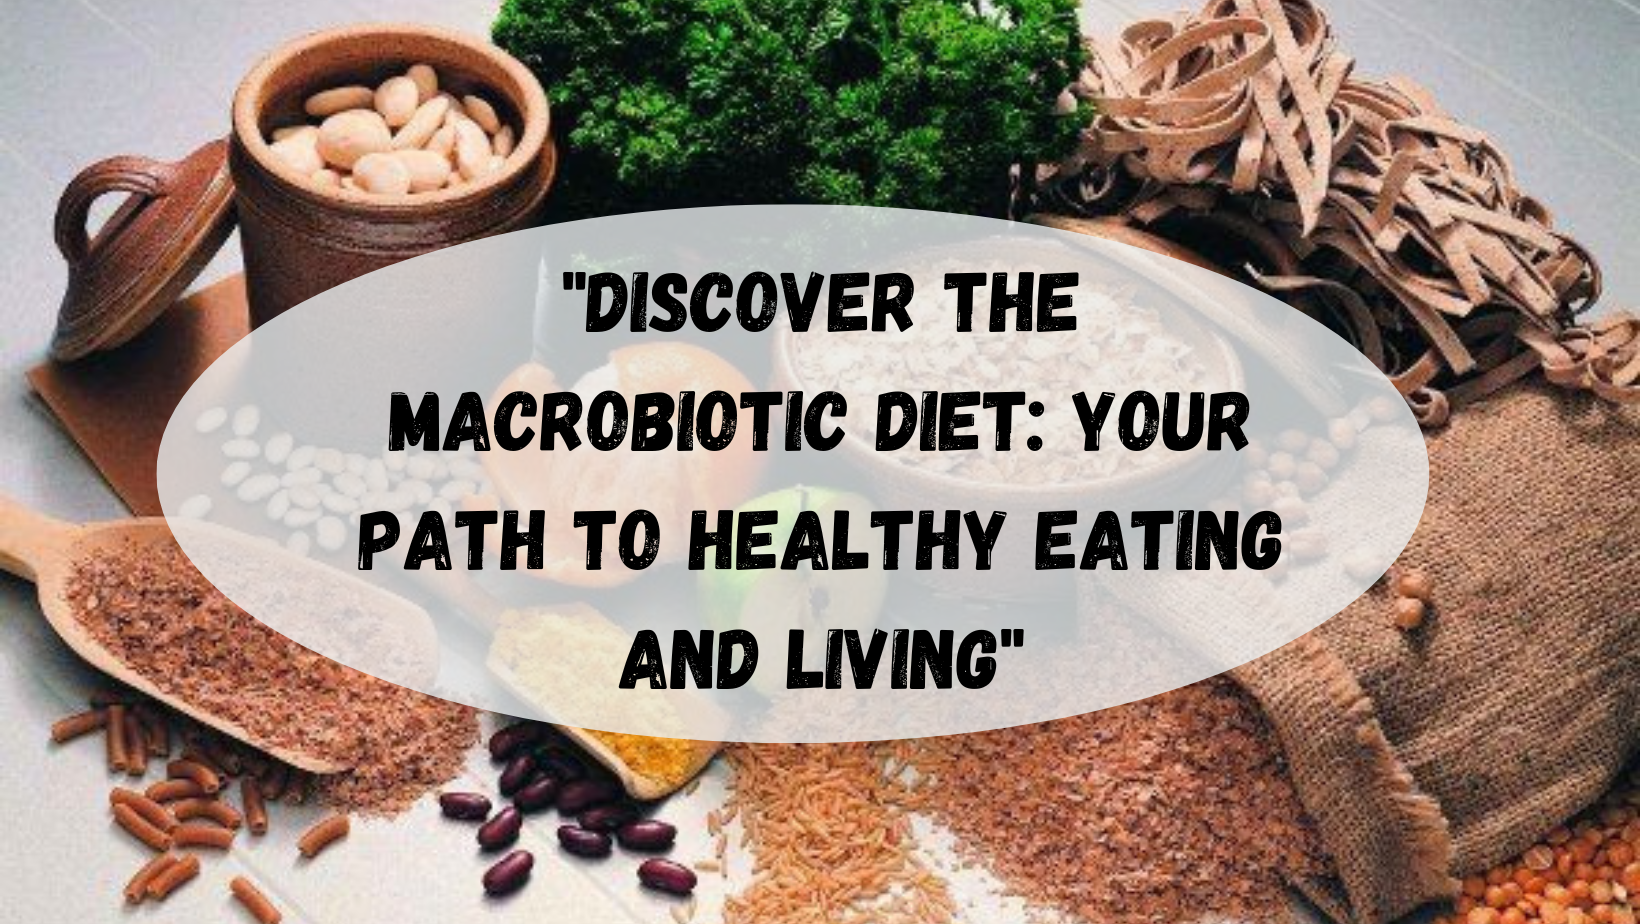 "Discover the Macrobiotic Diet: Your Path to Healthy Eating and Living"